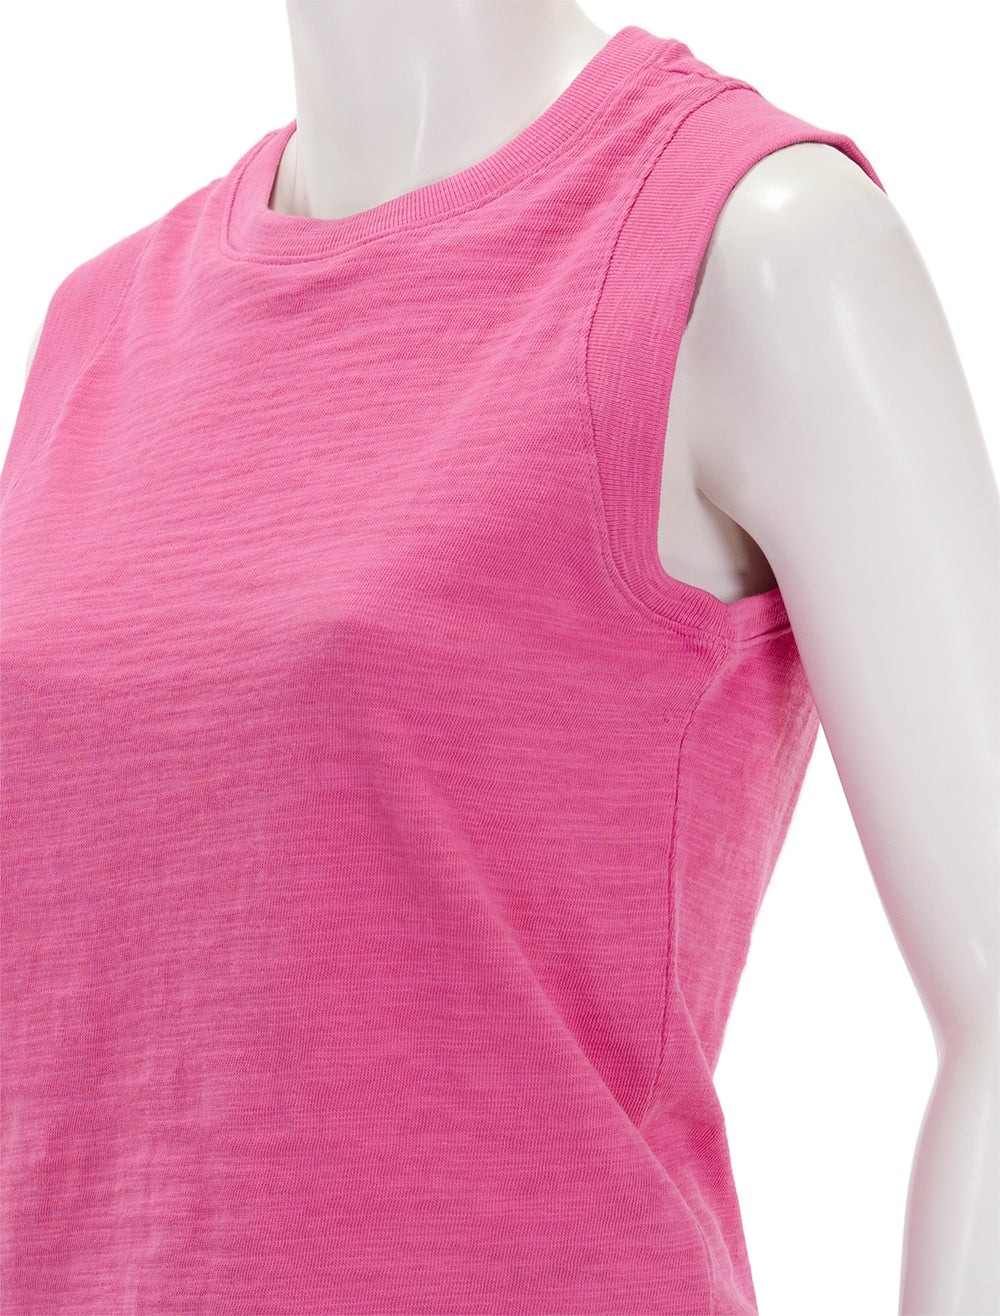 Close-up view of Faherty's sunwashed slub muscle tank in cone flower pink.